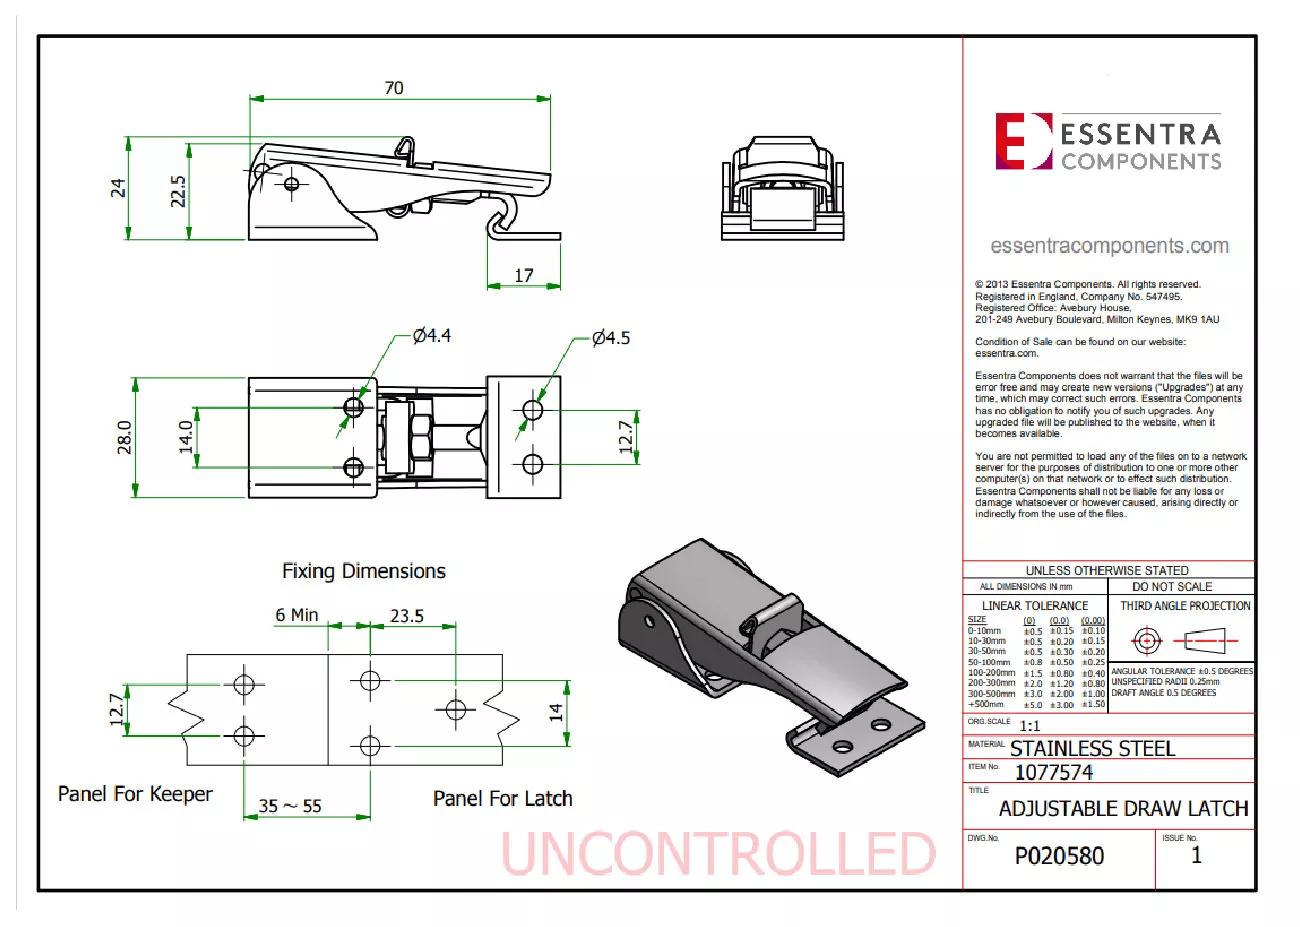 Technical drawing for Essentra’s adjustable draw latch 